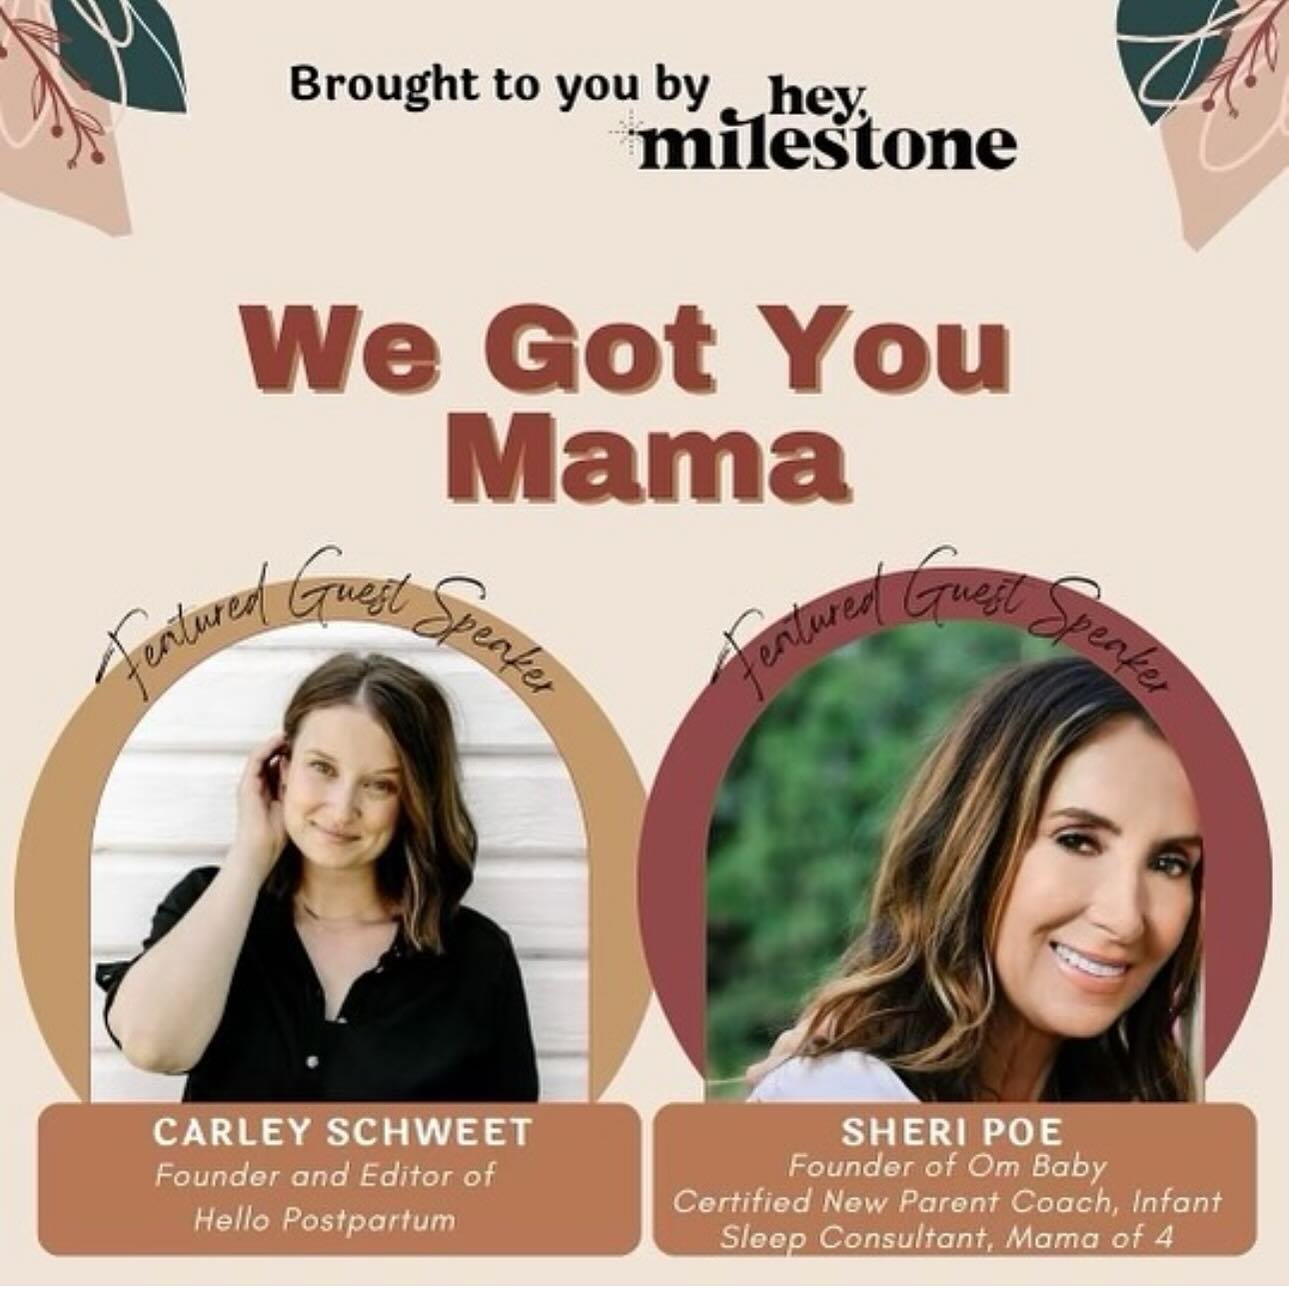 So excited continue the We Got You Mama Summit! For Day 10, Carley Schweet and I talk all things new parenthood! Get ready for an enlightening discussion filled with insights, tips, and strategies to help you through all the beautiful chaos with conf